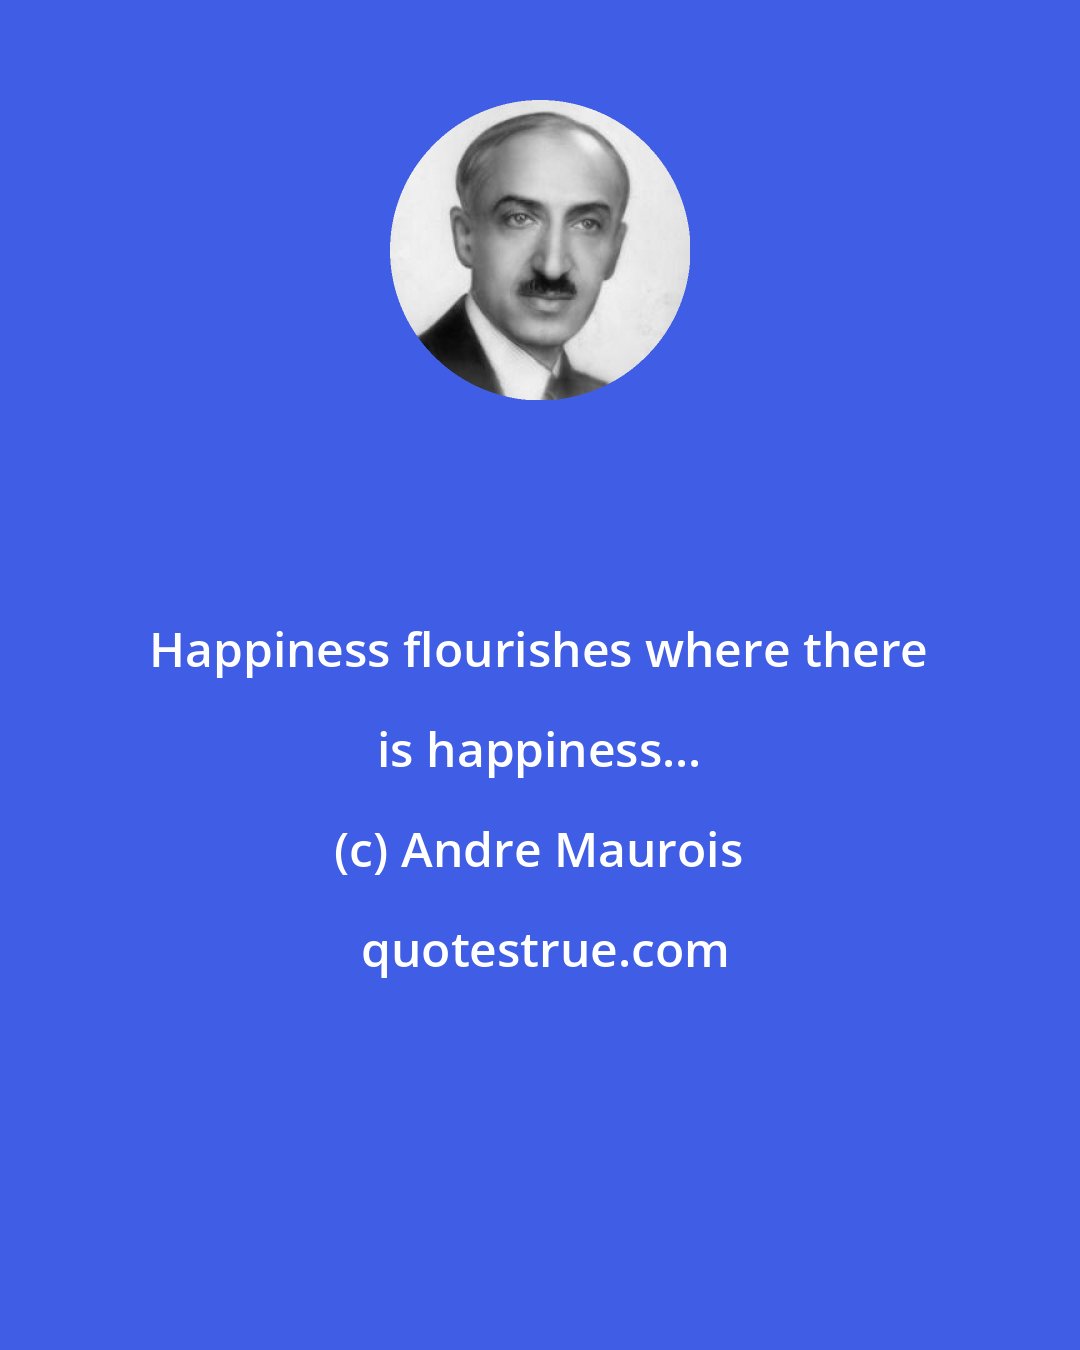 Andre Maurois: Happiness flourishes where there is happiness...